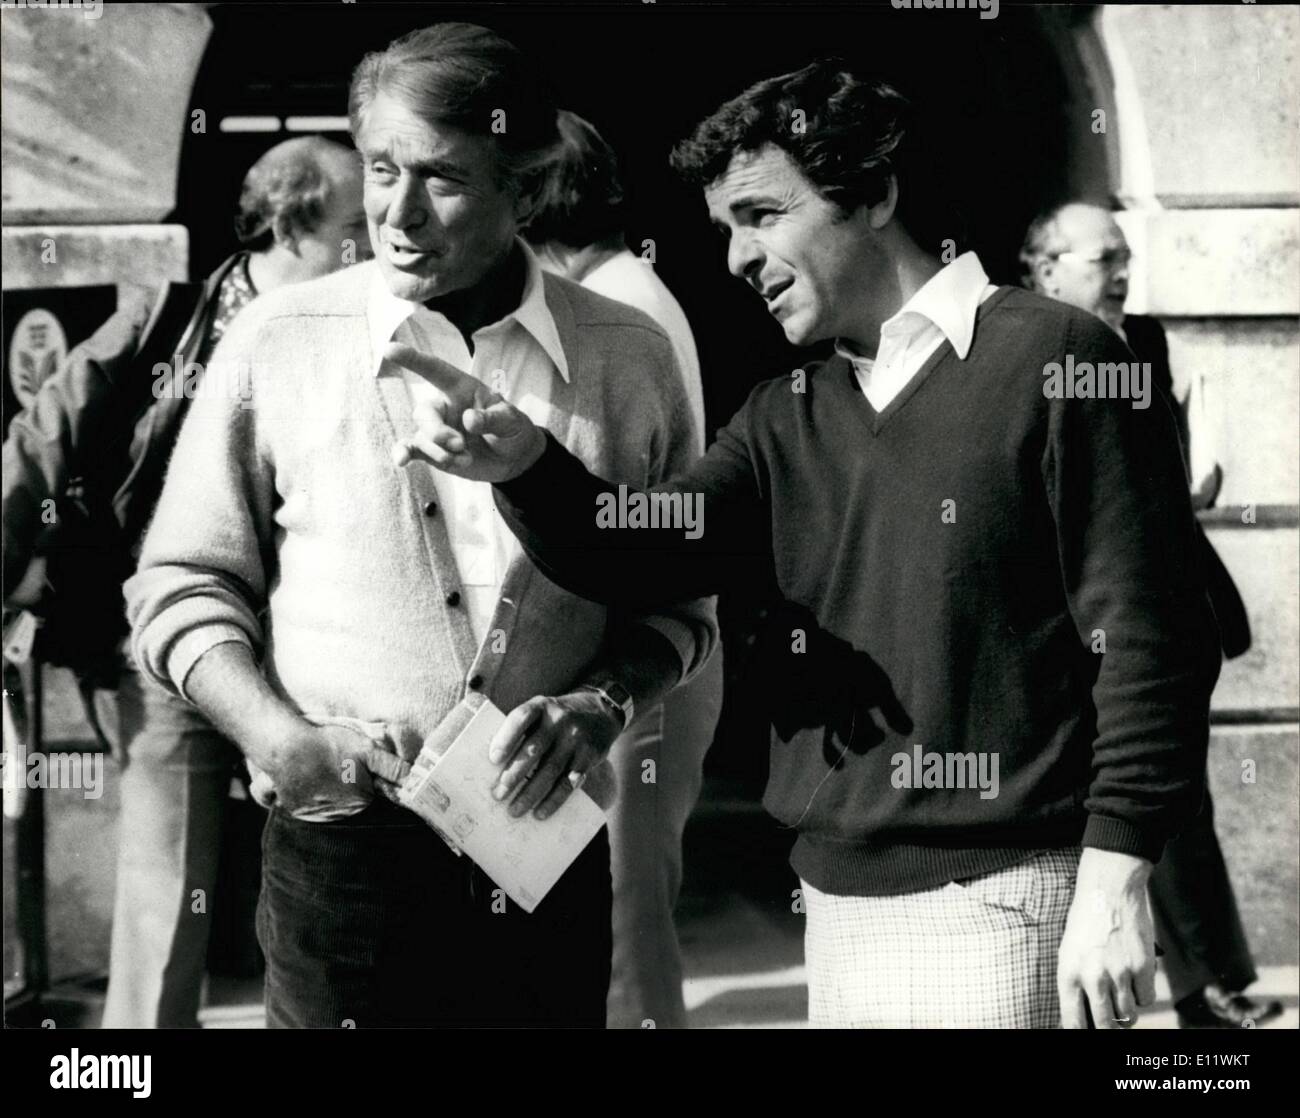 Sep. 09, 1980 - Golf and Showbiz Celebrates Practice for the Bob Hope British Classic Golf Pro Am at Epsom. Photo Shows: Efram Zimbalist Jr., star of ''F.B.I.'' and 77 sunset strip, is talking to British golfer Tony Jacklin, before practice at the R.A.C. Country Club, Epsom today for tomorrow Bob Hope pro-am. Stock Photo